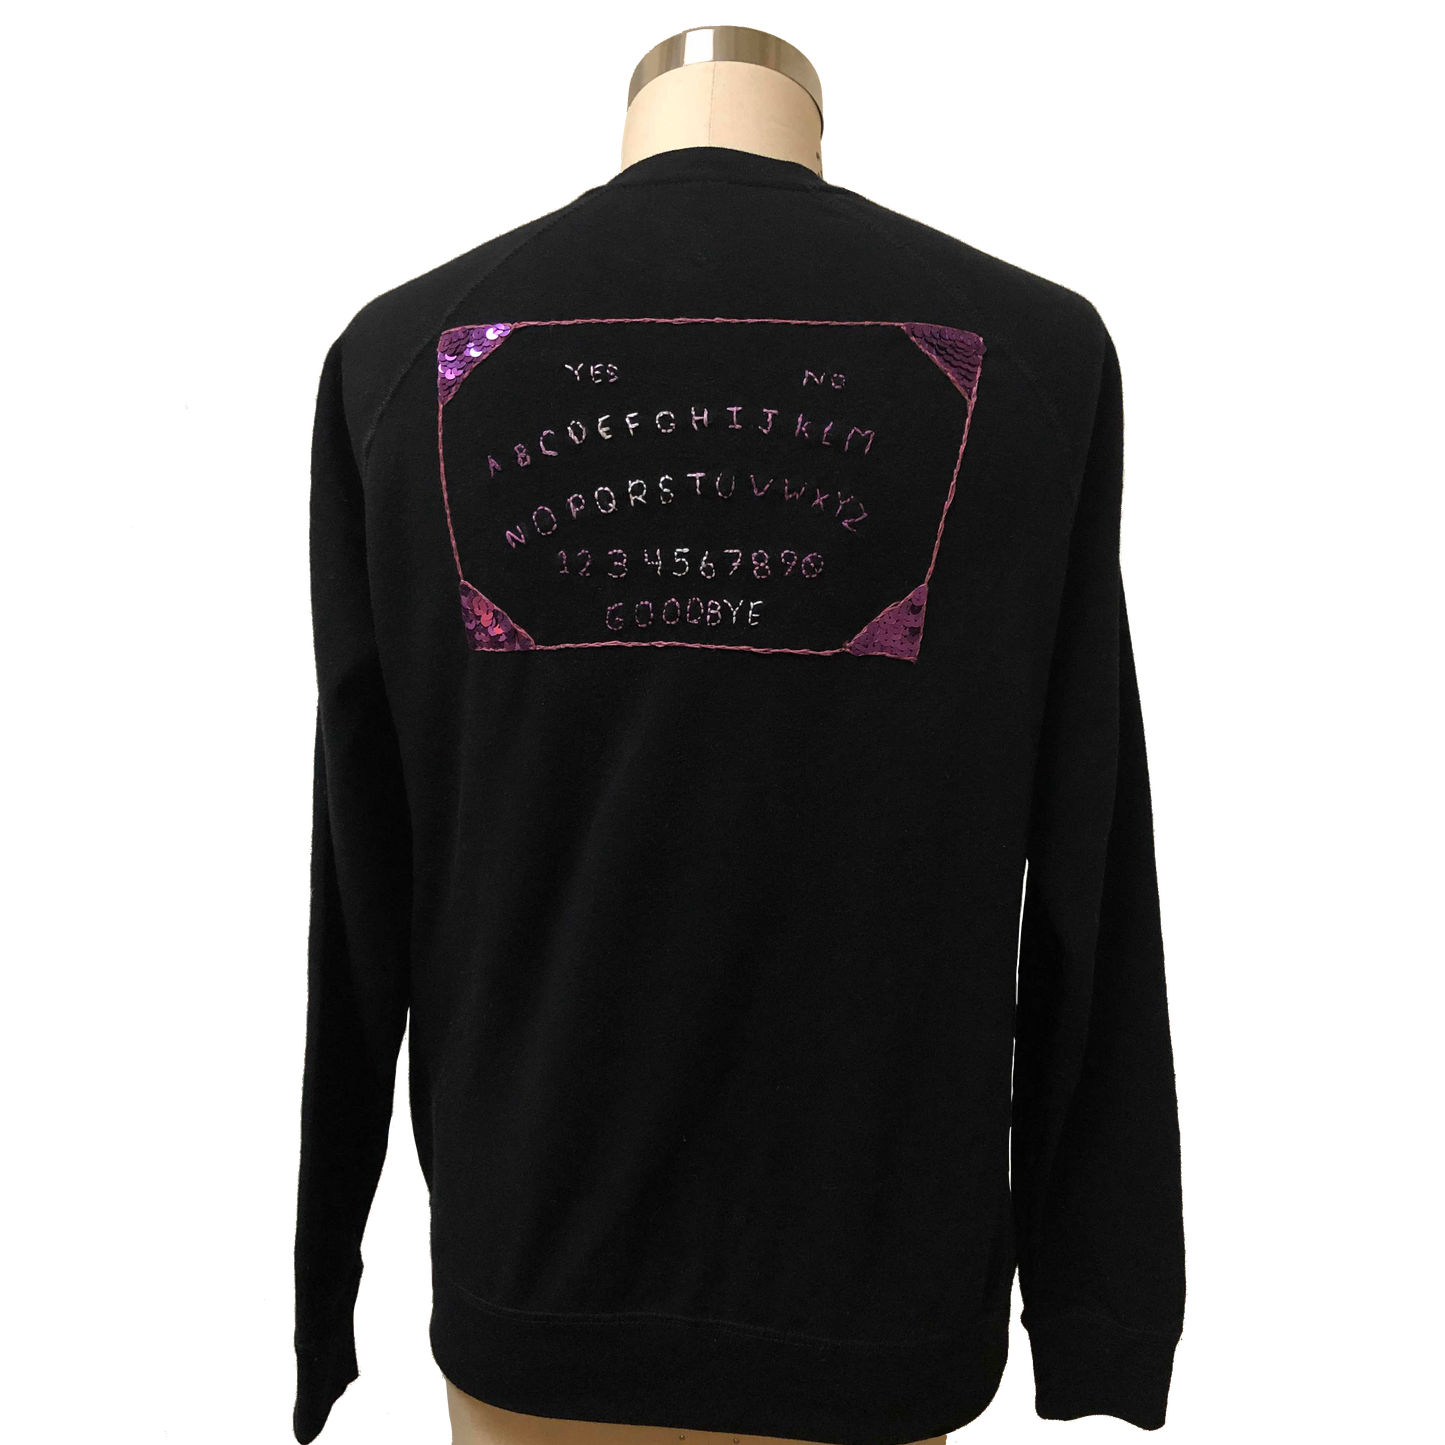 Back of Ouija sweater on dress form.